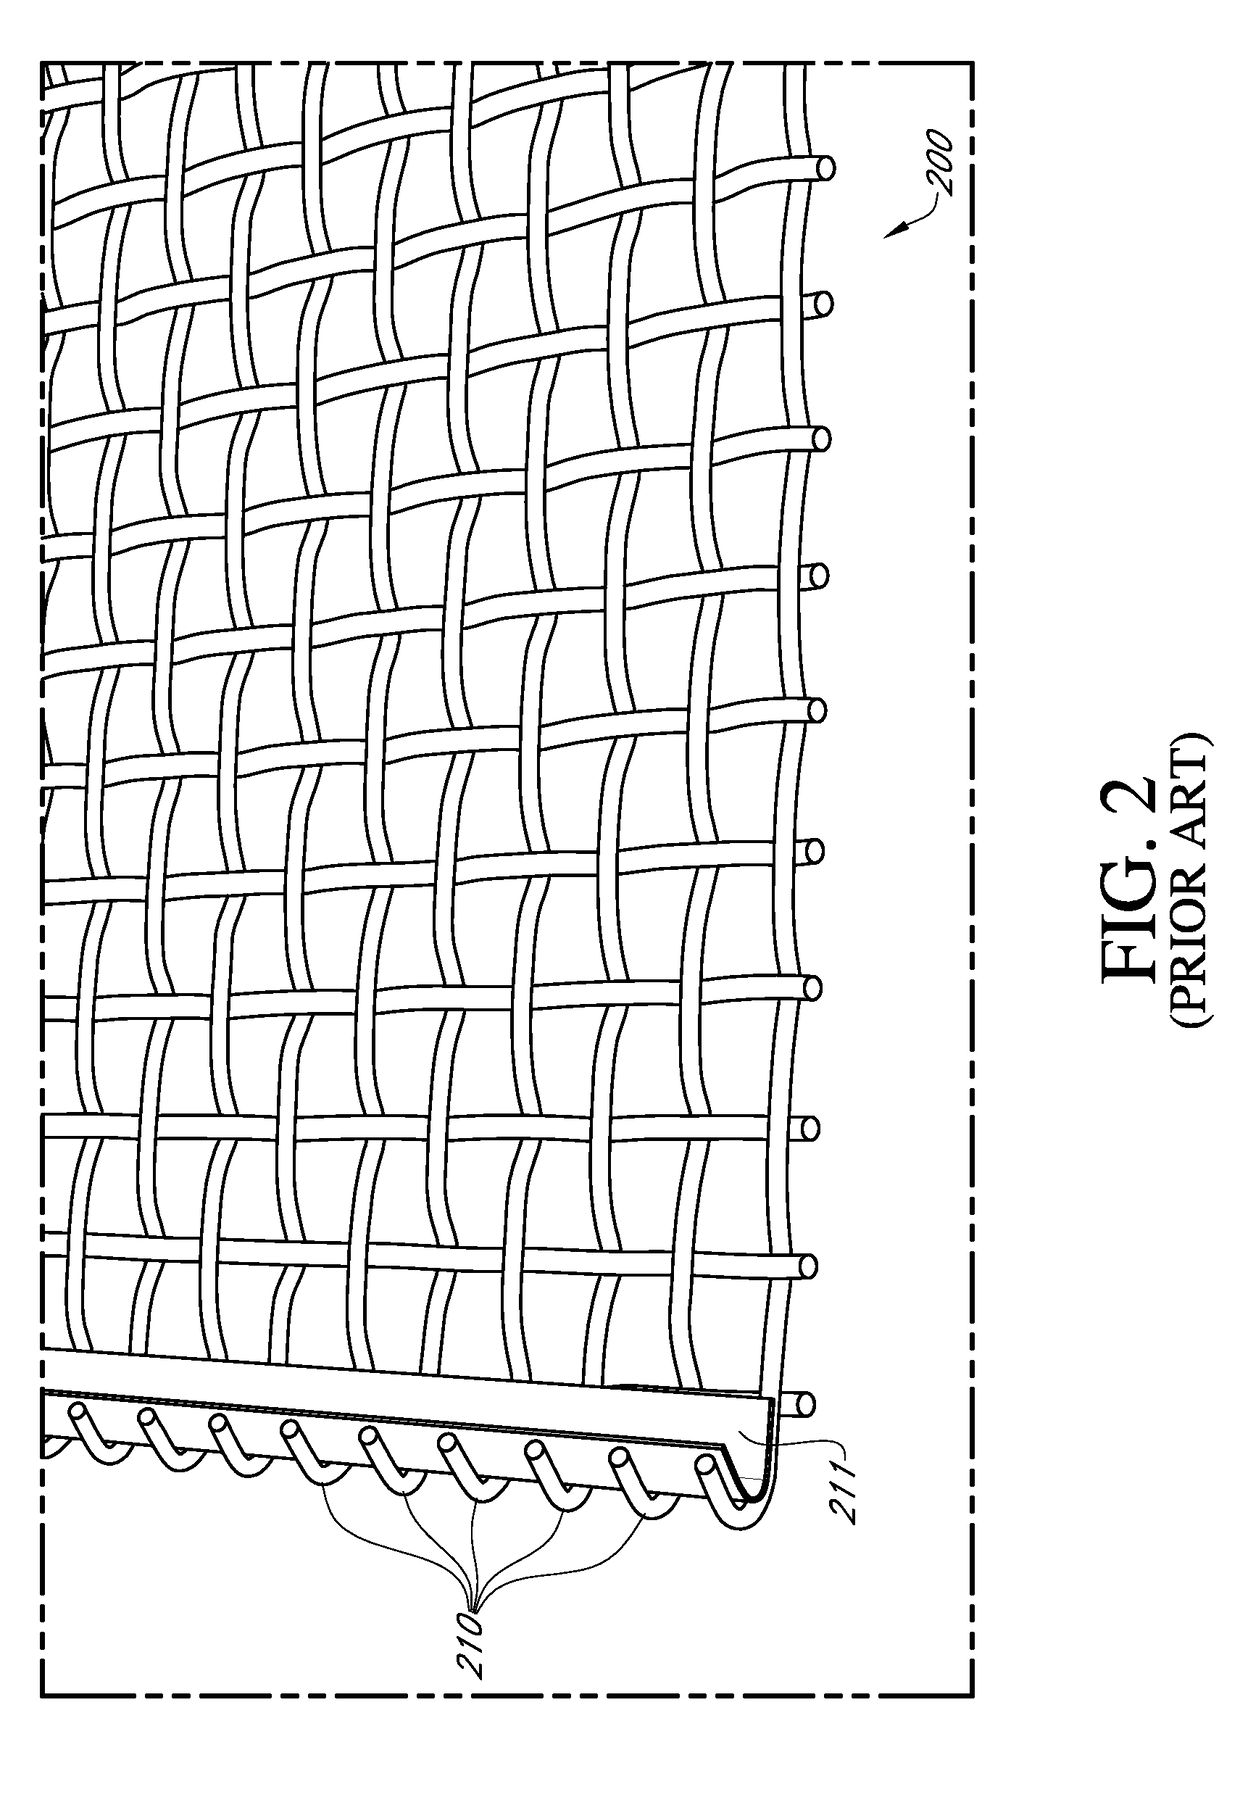 Method and apparatus for applying tension to a screen cloth on a vibrating screening machine